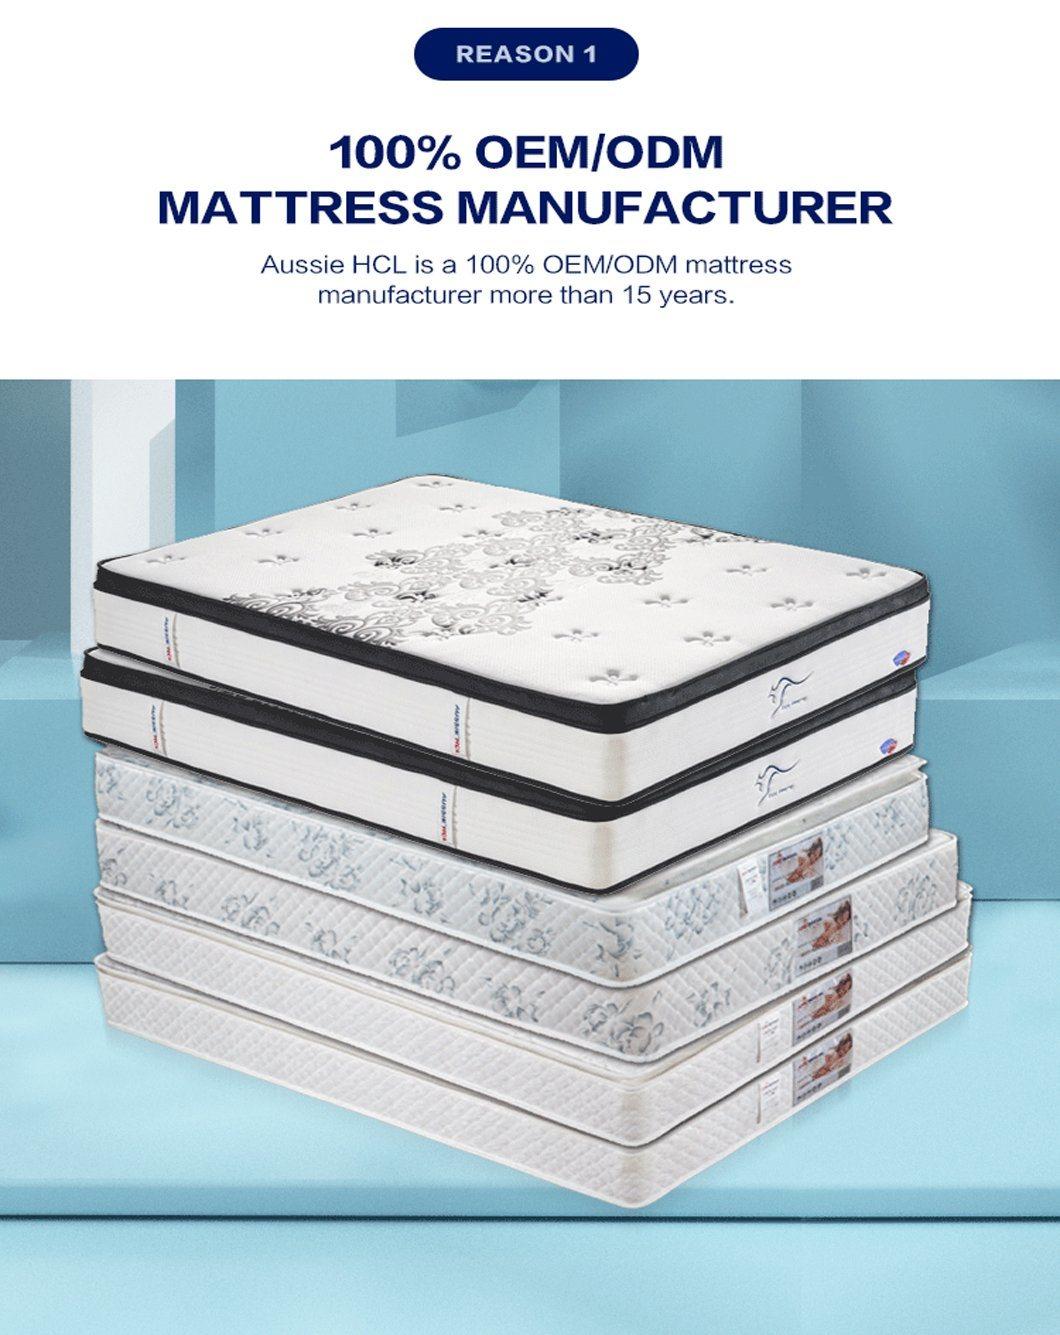 Premium Wholesale Modern Bed Mattresses for Bedroom Furniture in a Box Queen King Full Size Spring Coil Latex Gel Memory Foam Mattress